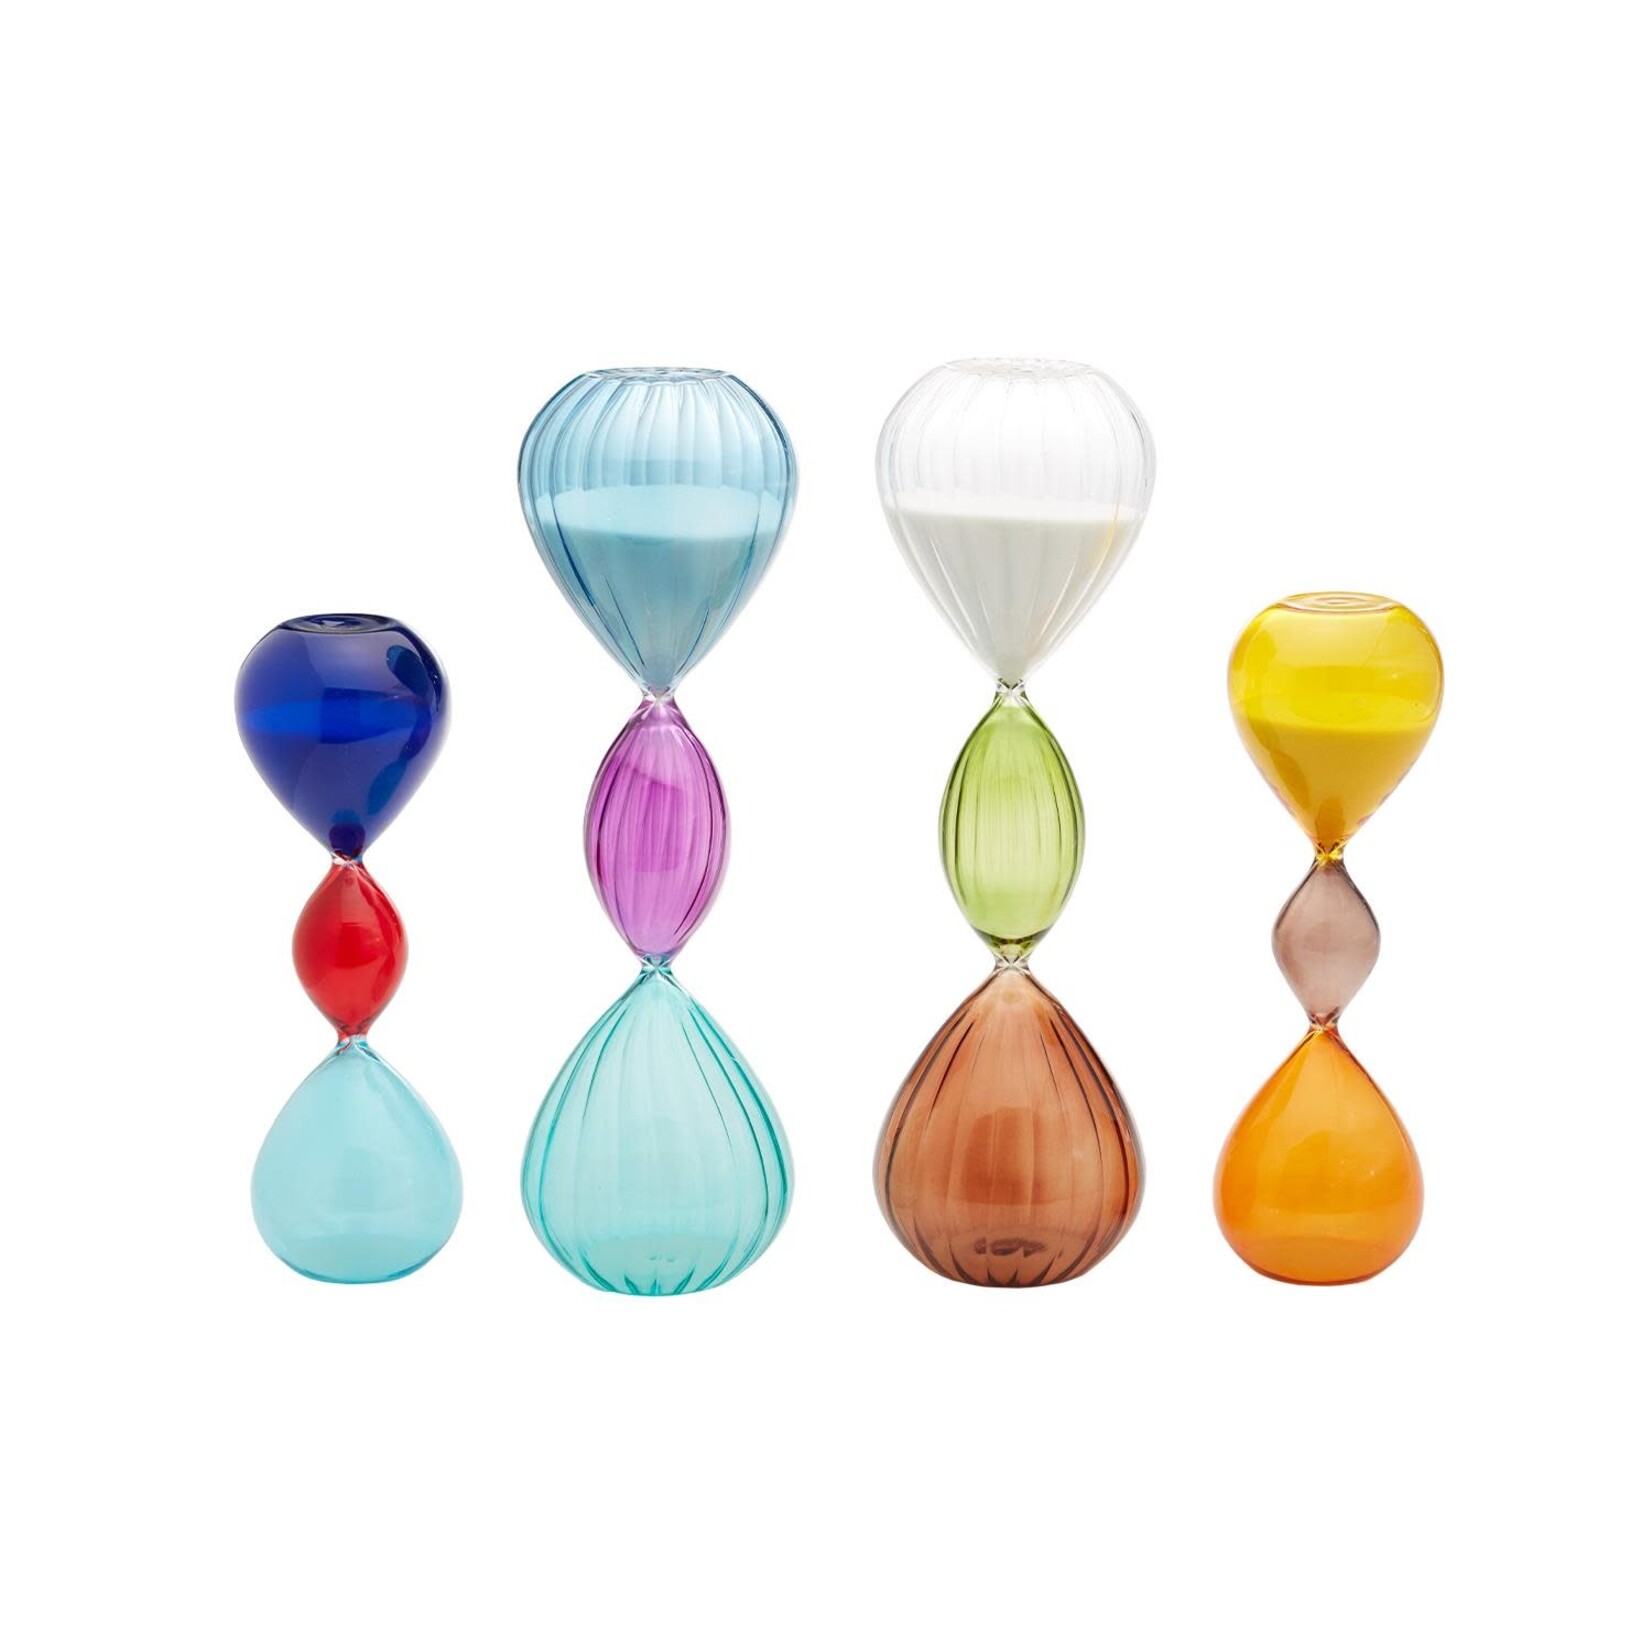 TWO COMPANY COLOR SAND TIMERS SMALL